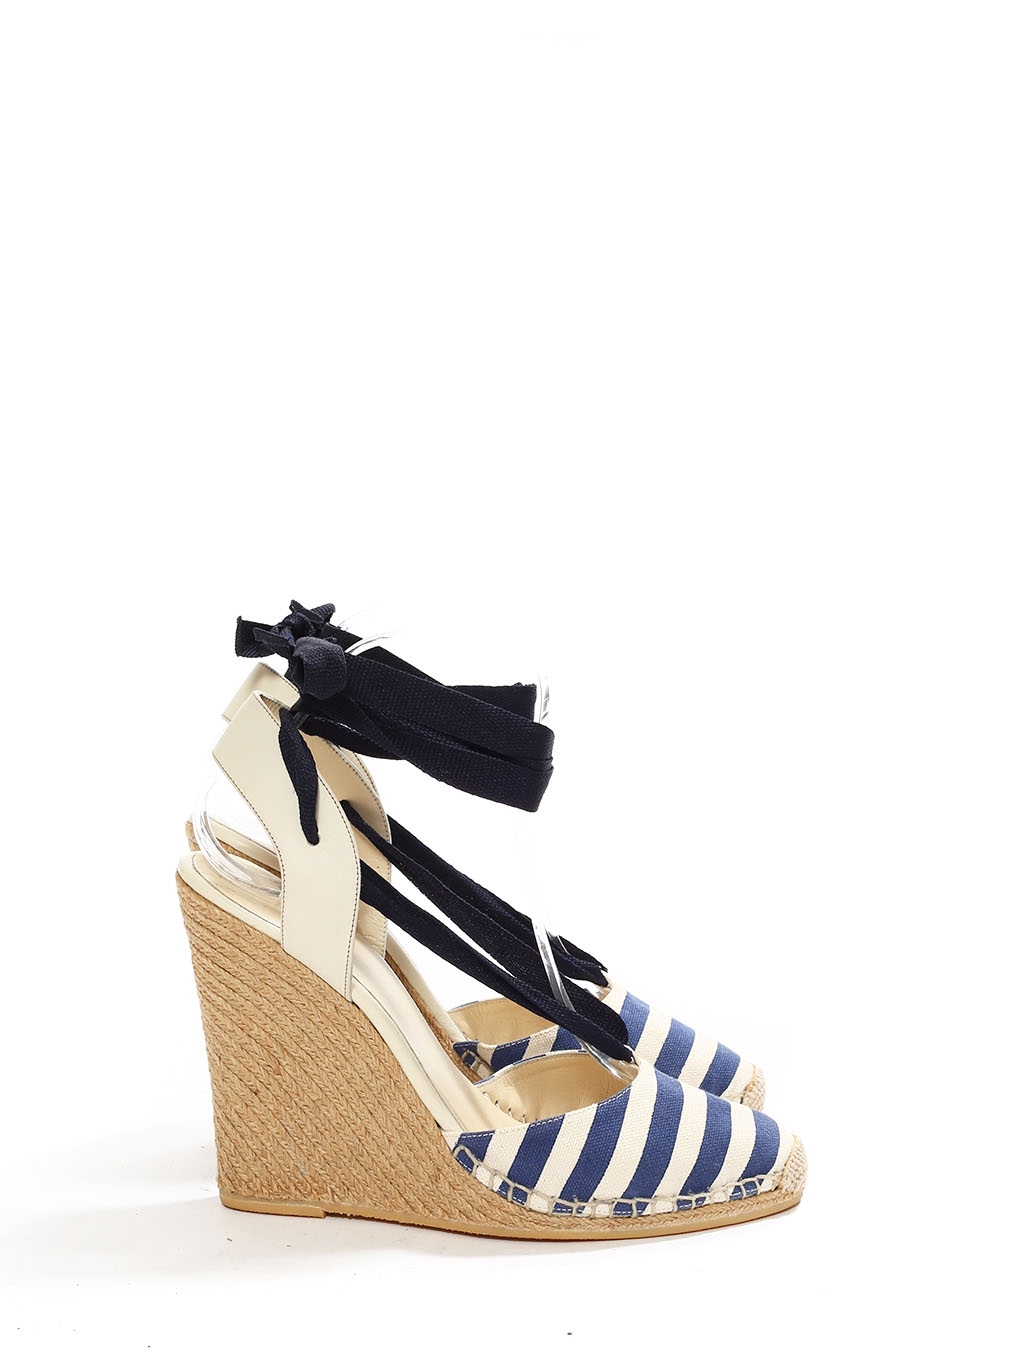 Boutique GUCCI Ivory and navy striped canvas espadrilles wedge sandals Retail price €450 Size 39